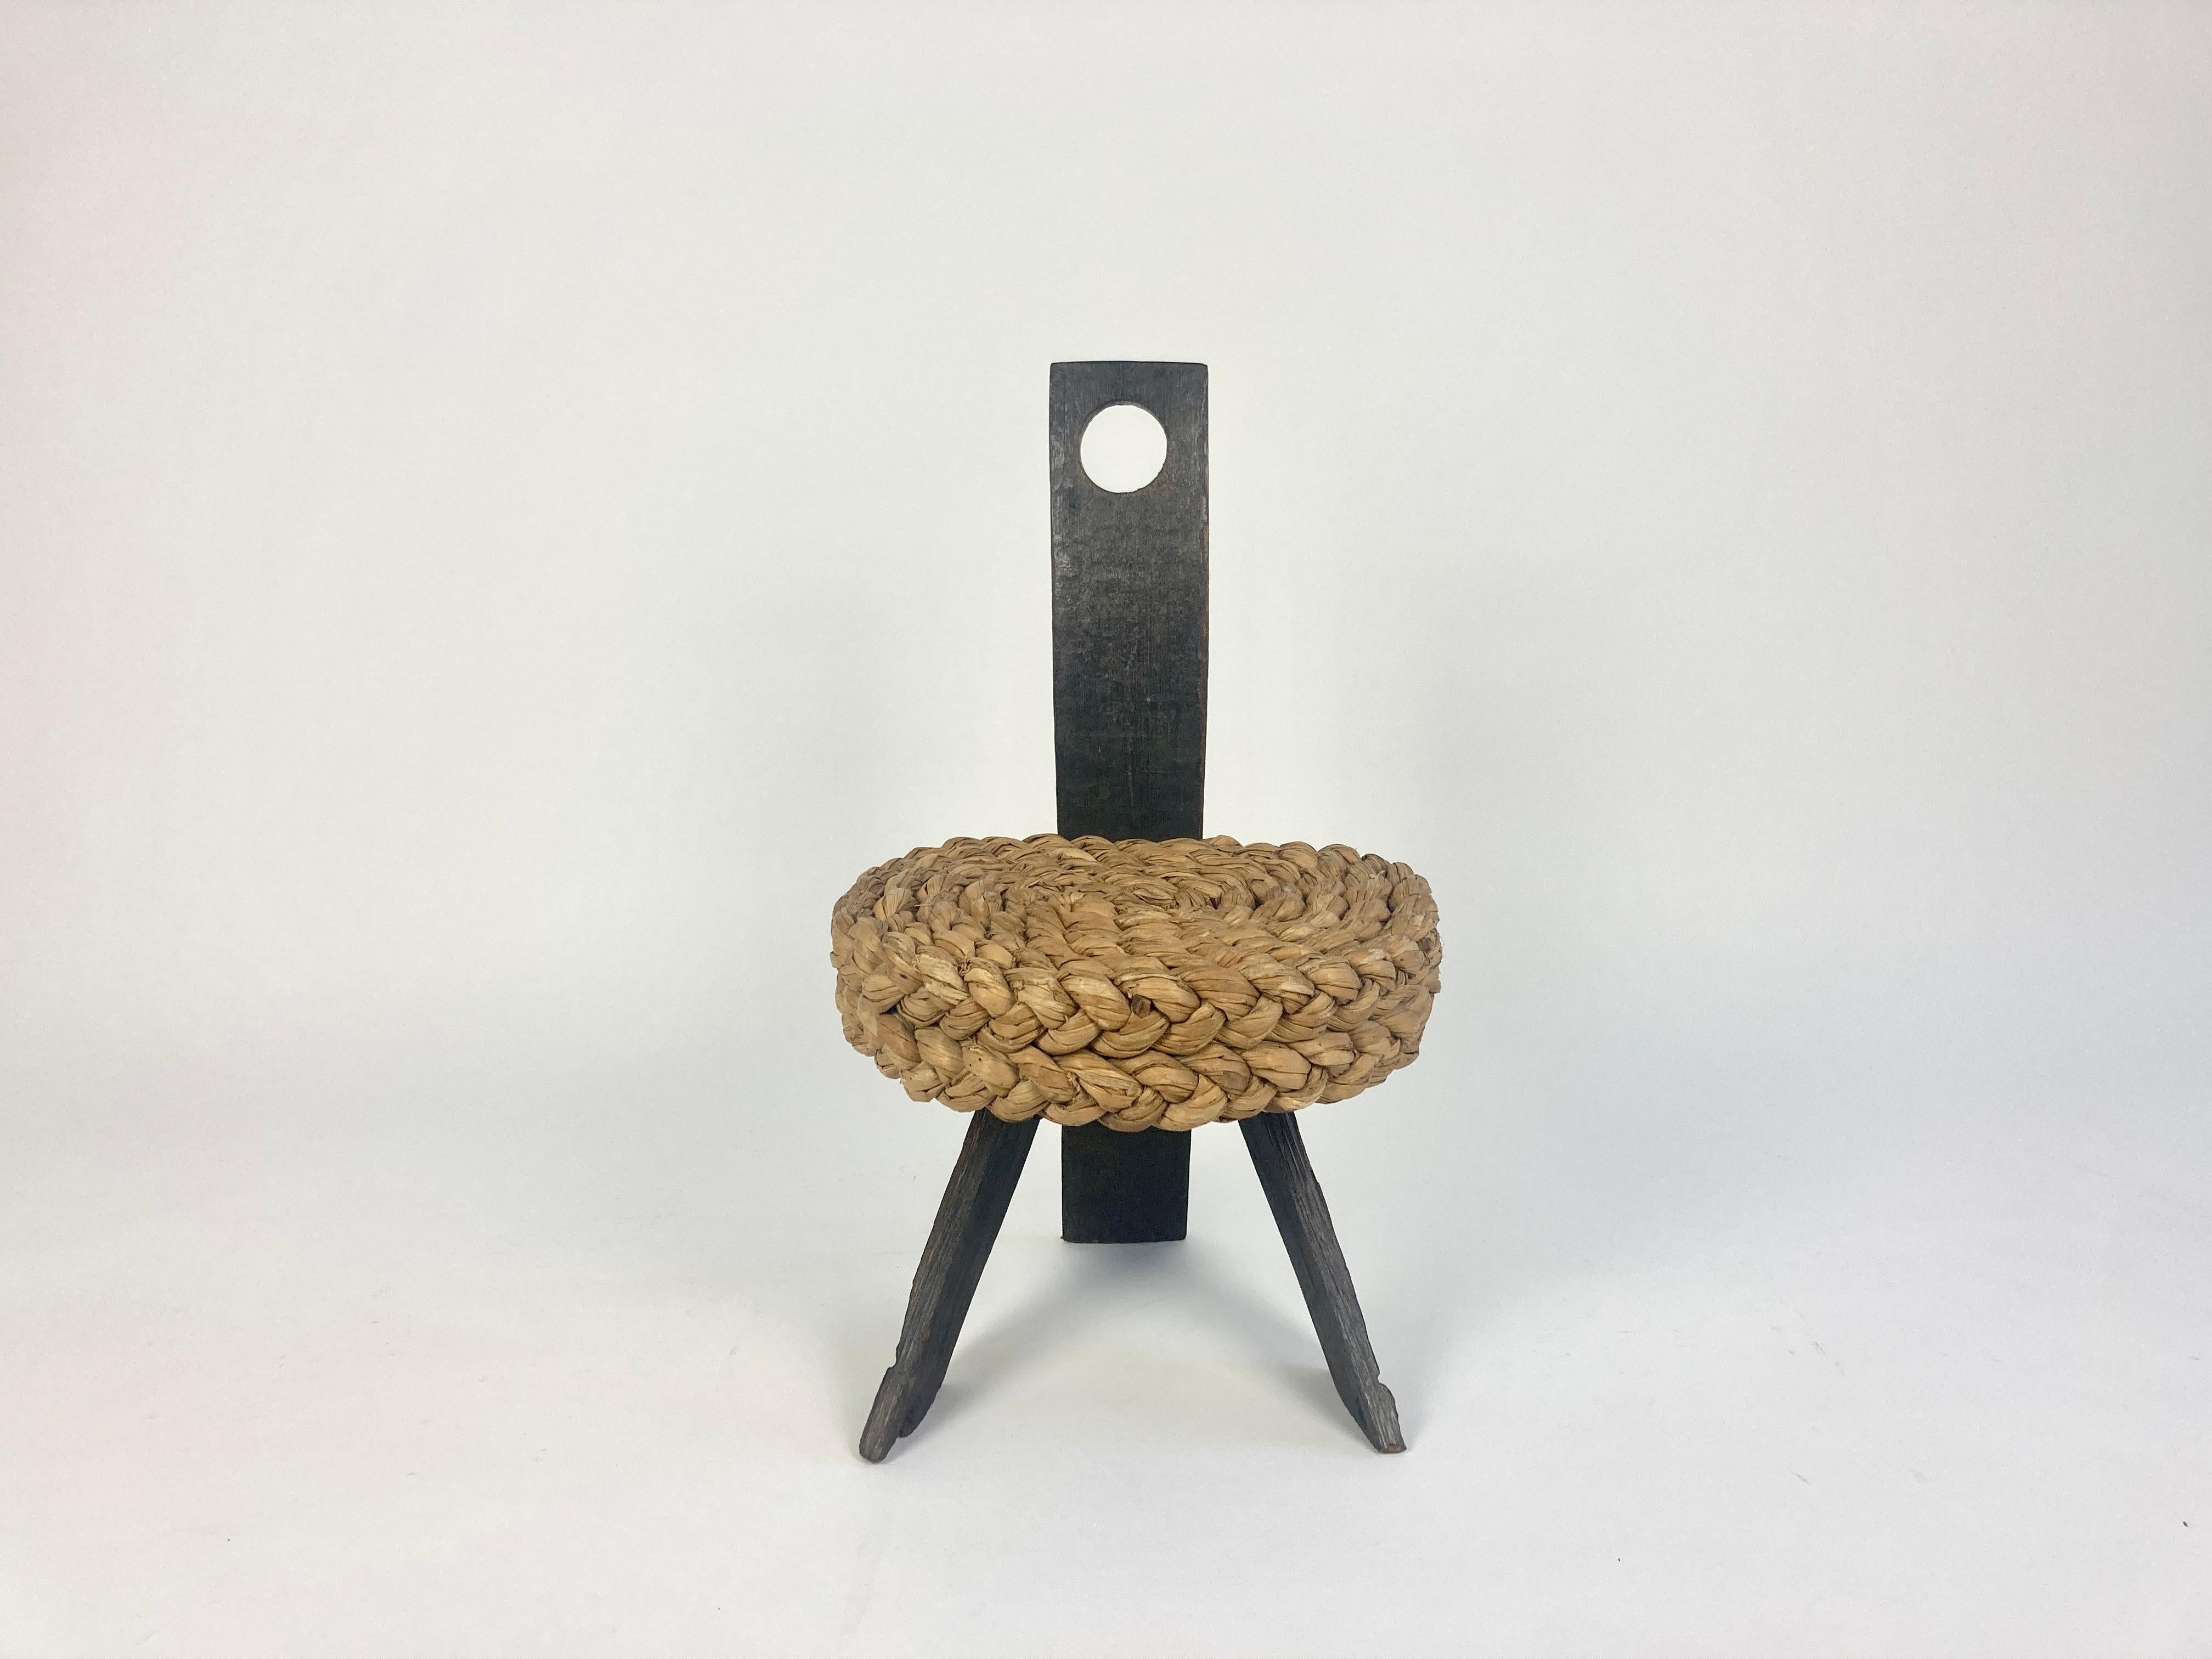 Low stool  by French designers Adrien Audoux and Frida Minet. France, 1950s.

The seat is made of thick reed braids woven in a circular pattern. Legs and back rest are made of dark oak which perfectly contrasts the seat. The chair has a wonderful